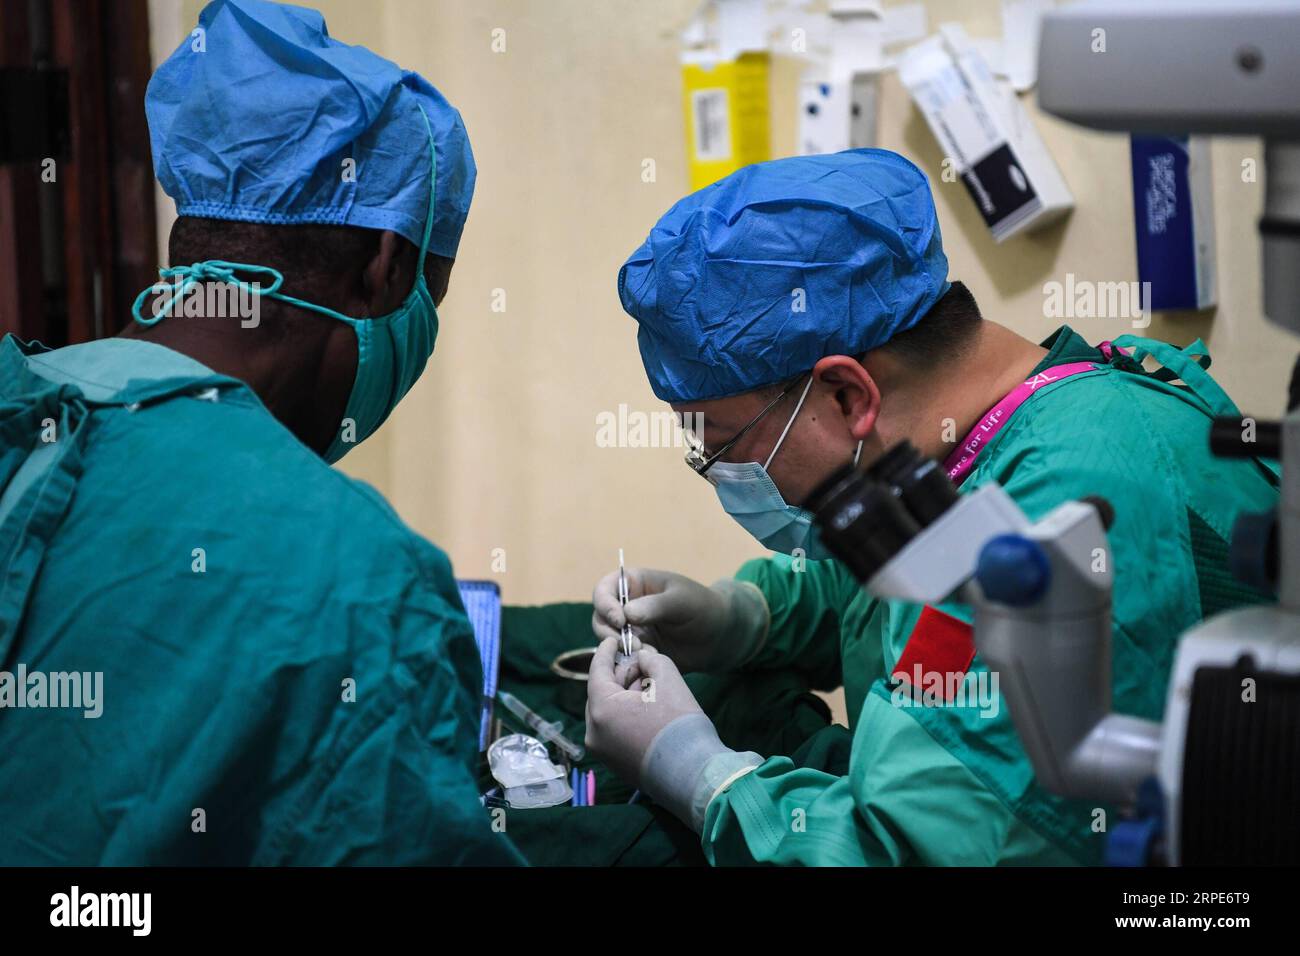 (190819) -- BEIJING, Aug. 19, 2019 -- Lin Xiaojun (R), a member of the 29th Chinese medical aid to Zanzibar, and a local doctor conduct a cataract surgery for Issa Khamis Issa in Zanzibar, Tanzania, Aug. 1, 2019. Since 1963, some 220 million patients in 48 African countries have been treated by Chinese medical personnel as of 2018, according to the National Health Commission. Currently, 983 Chinese doctors are providing free medical services in 45 African countries. ) AFRICA-CHINA-MEDICAL TEAMS-AID LixYan PUBLICATIONxNOTxINxCHN Stock Photo